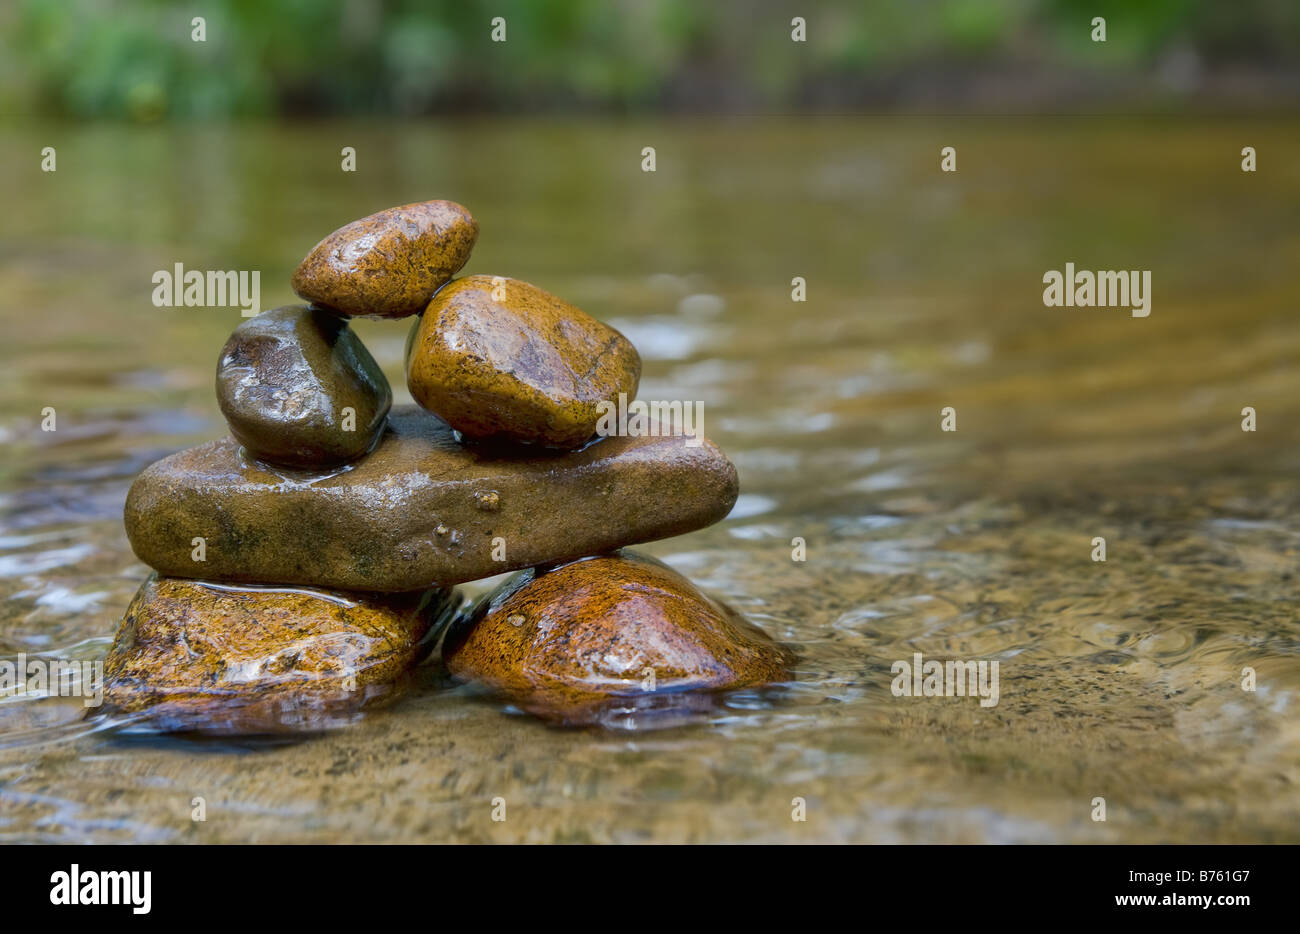 great image of tower of balancing rocks or stones in the river Stock Photo